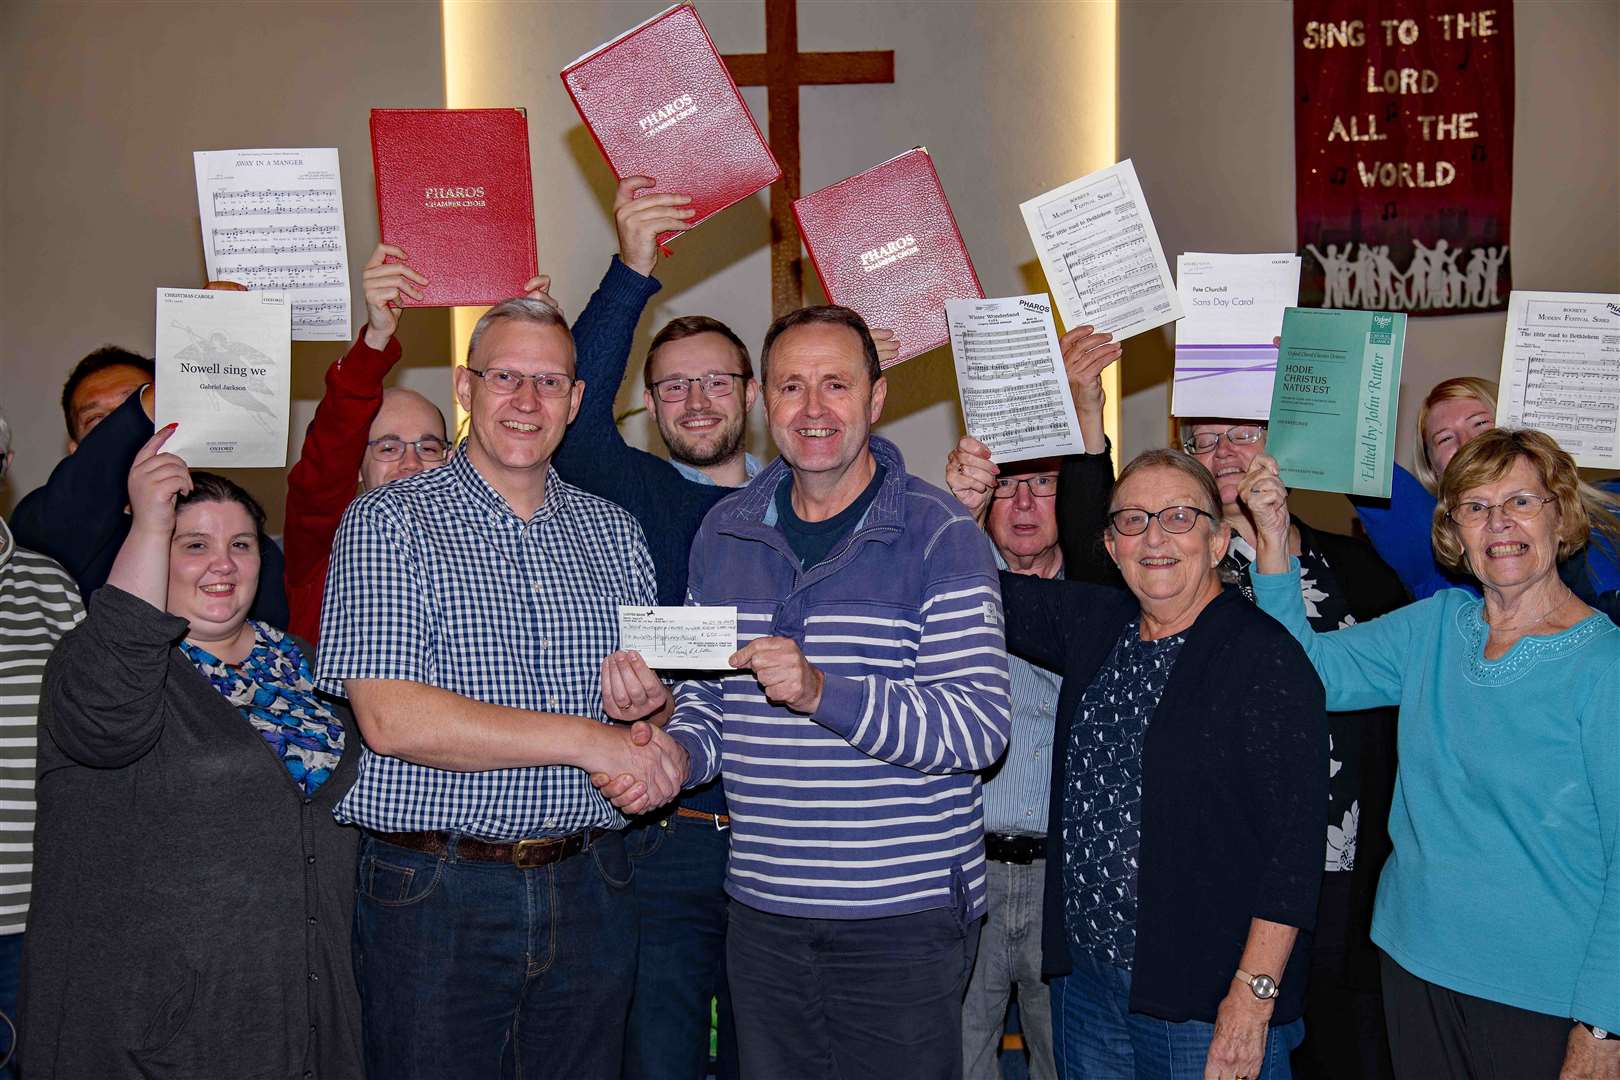 Pharos Chamber Choir founder/director Stephen Yarrow (left) presents a cheque for £650 to Noel Beamish of the Dover Winter Night Shelter. Photo: Donald Beck